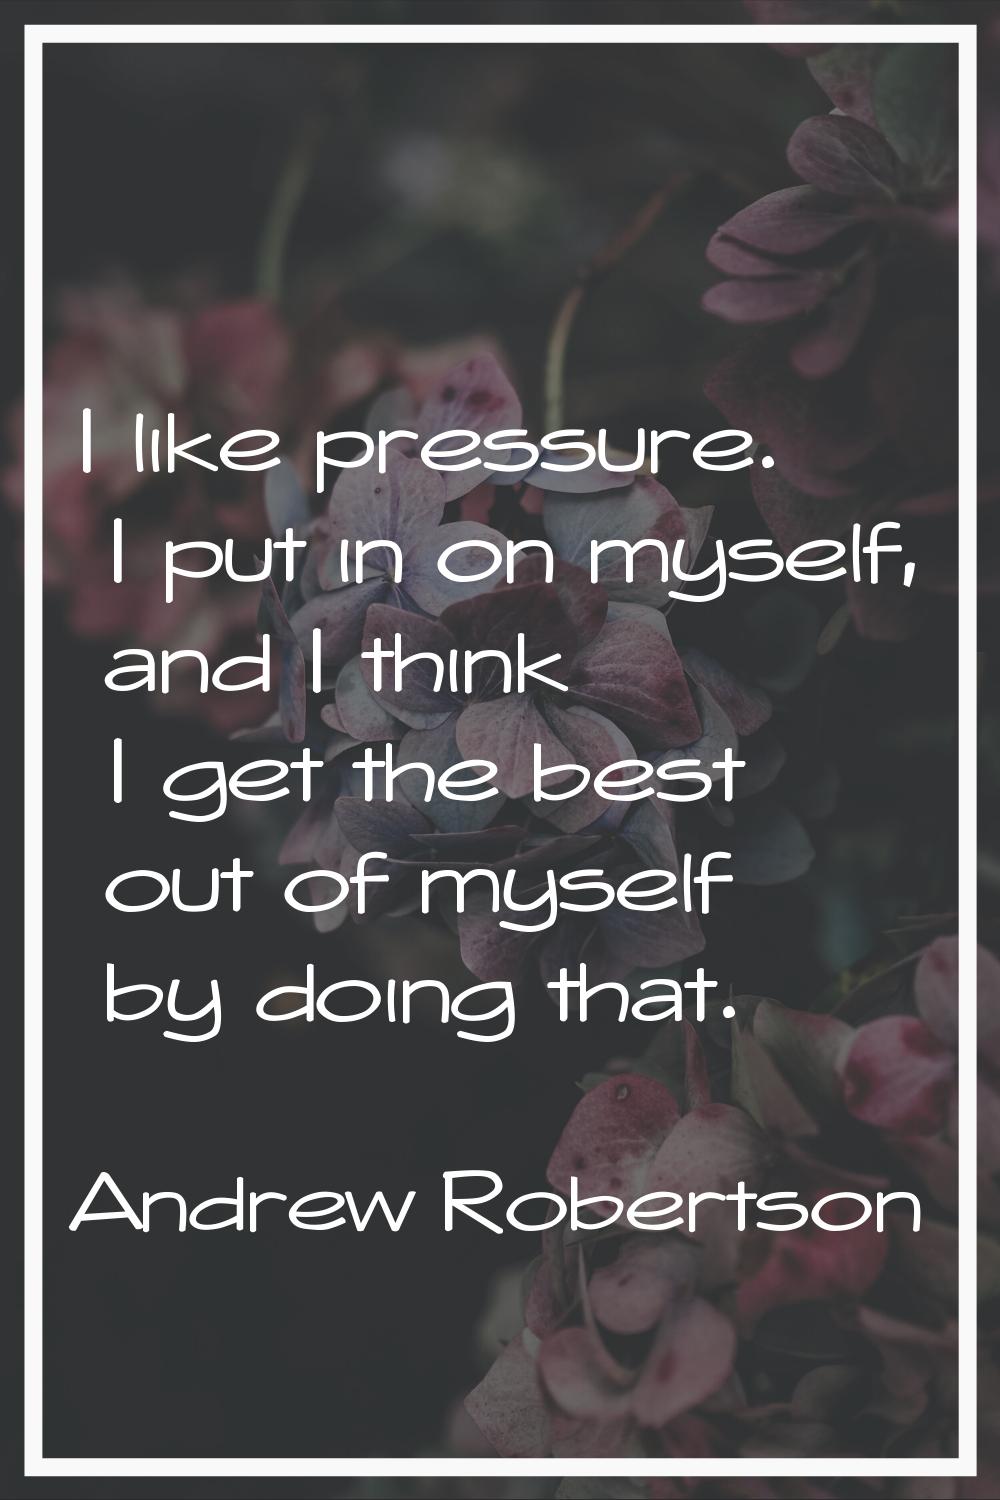 I like pressure. I put in on myself, and I think I get the best out of myself by doing that.